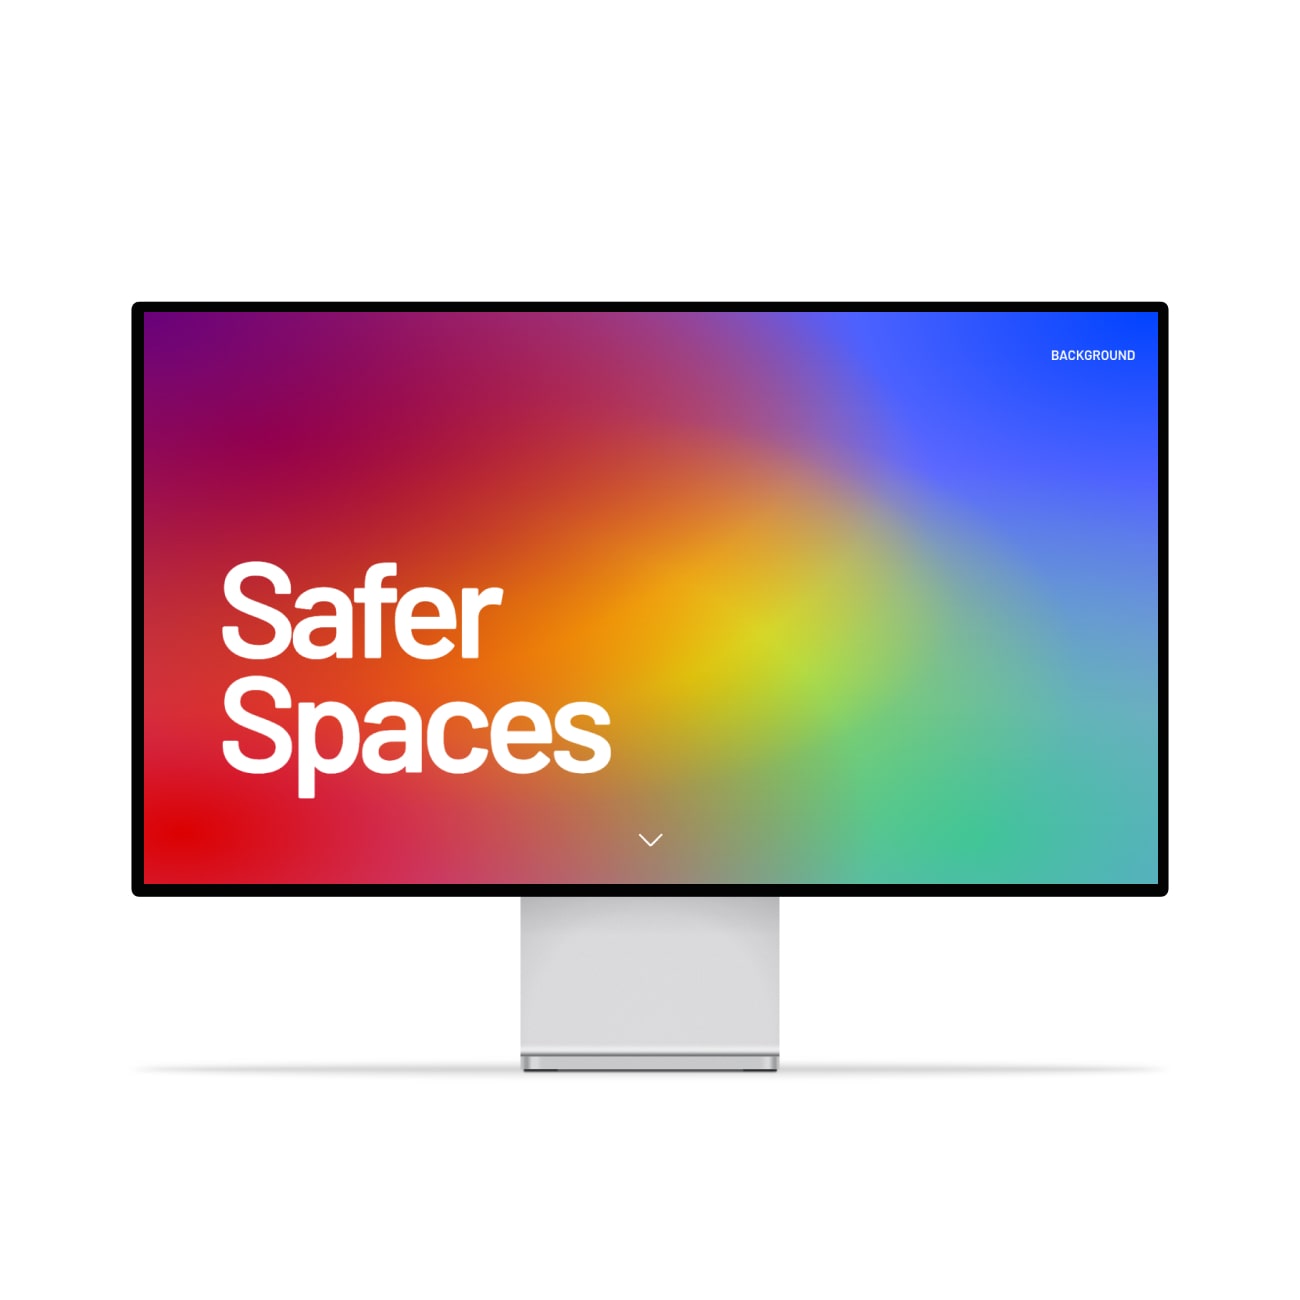 Safer Spaces